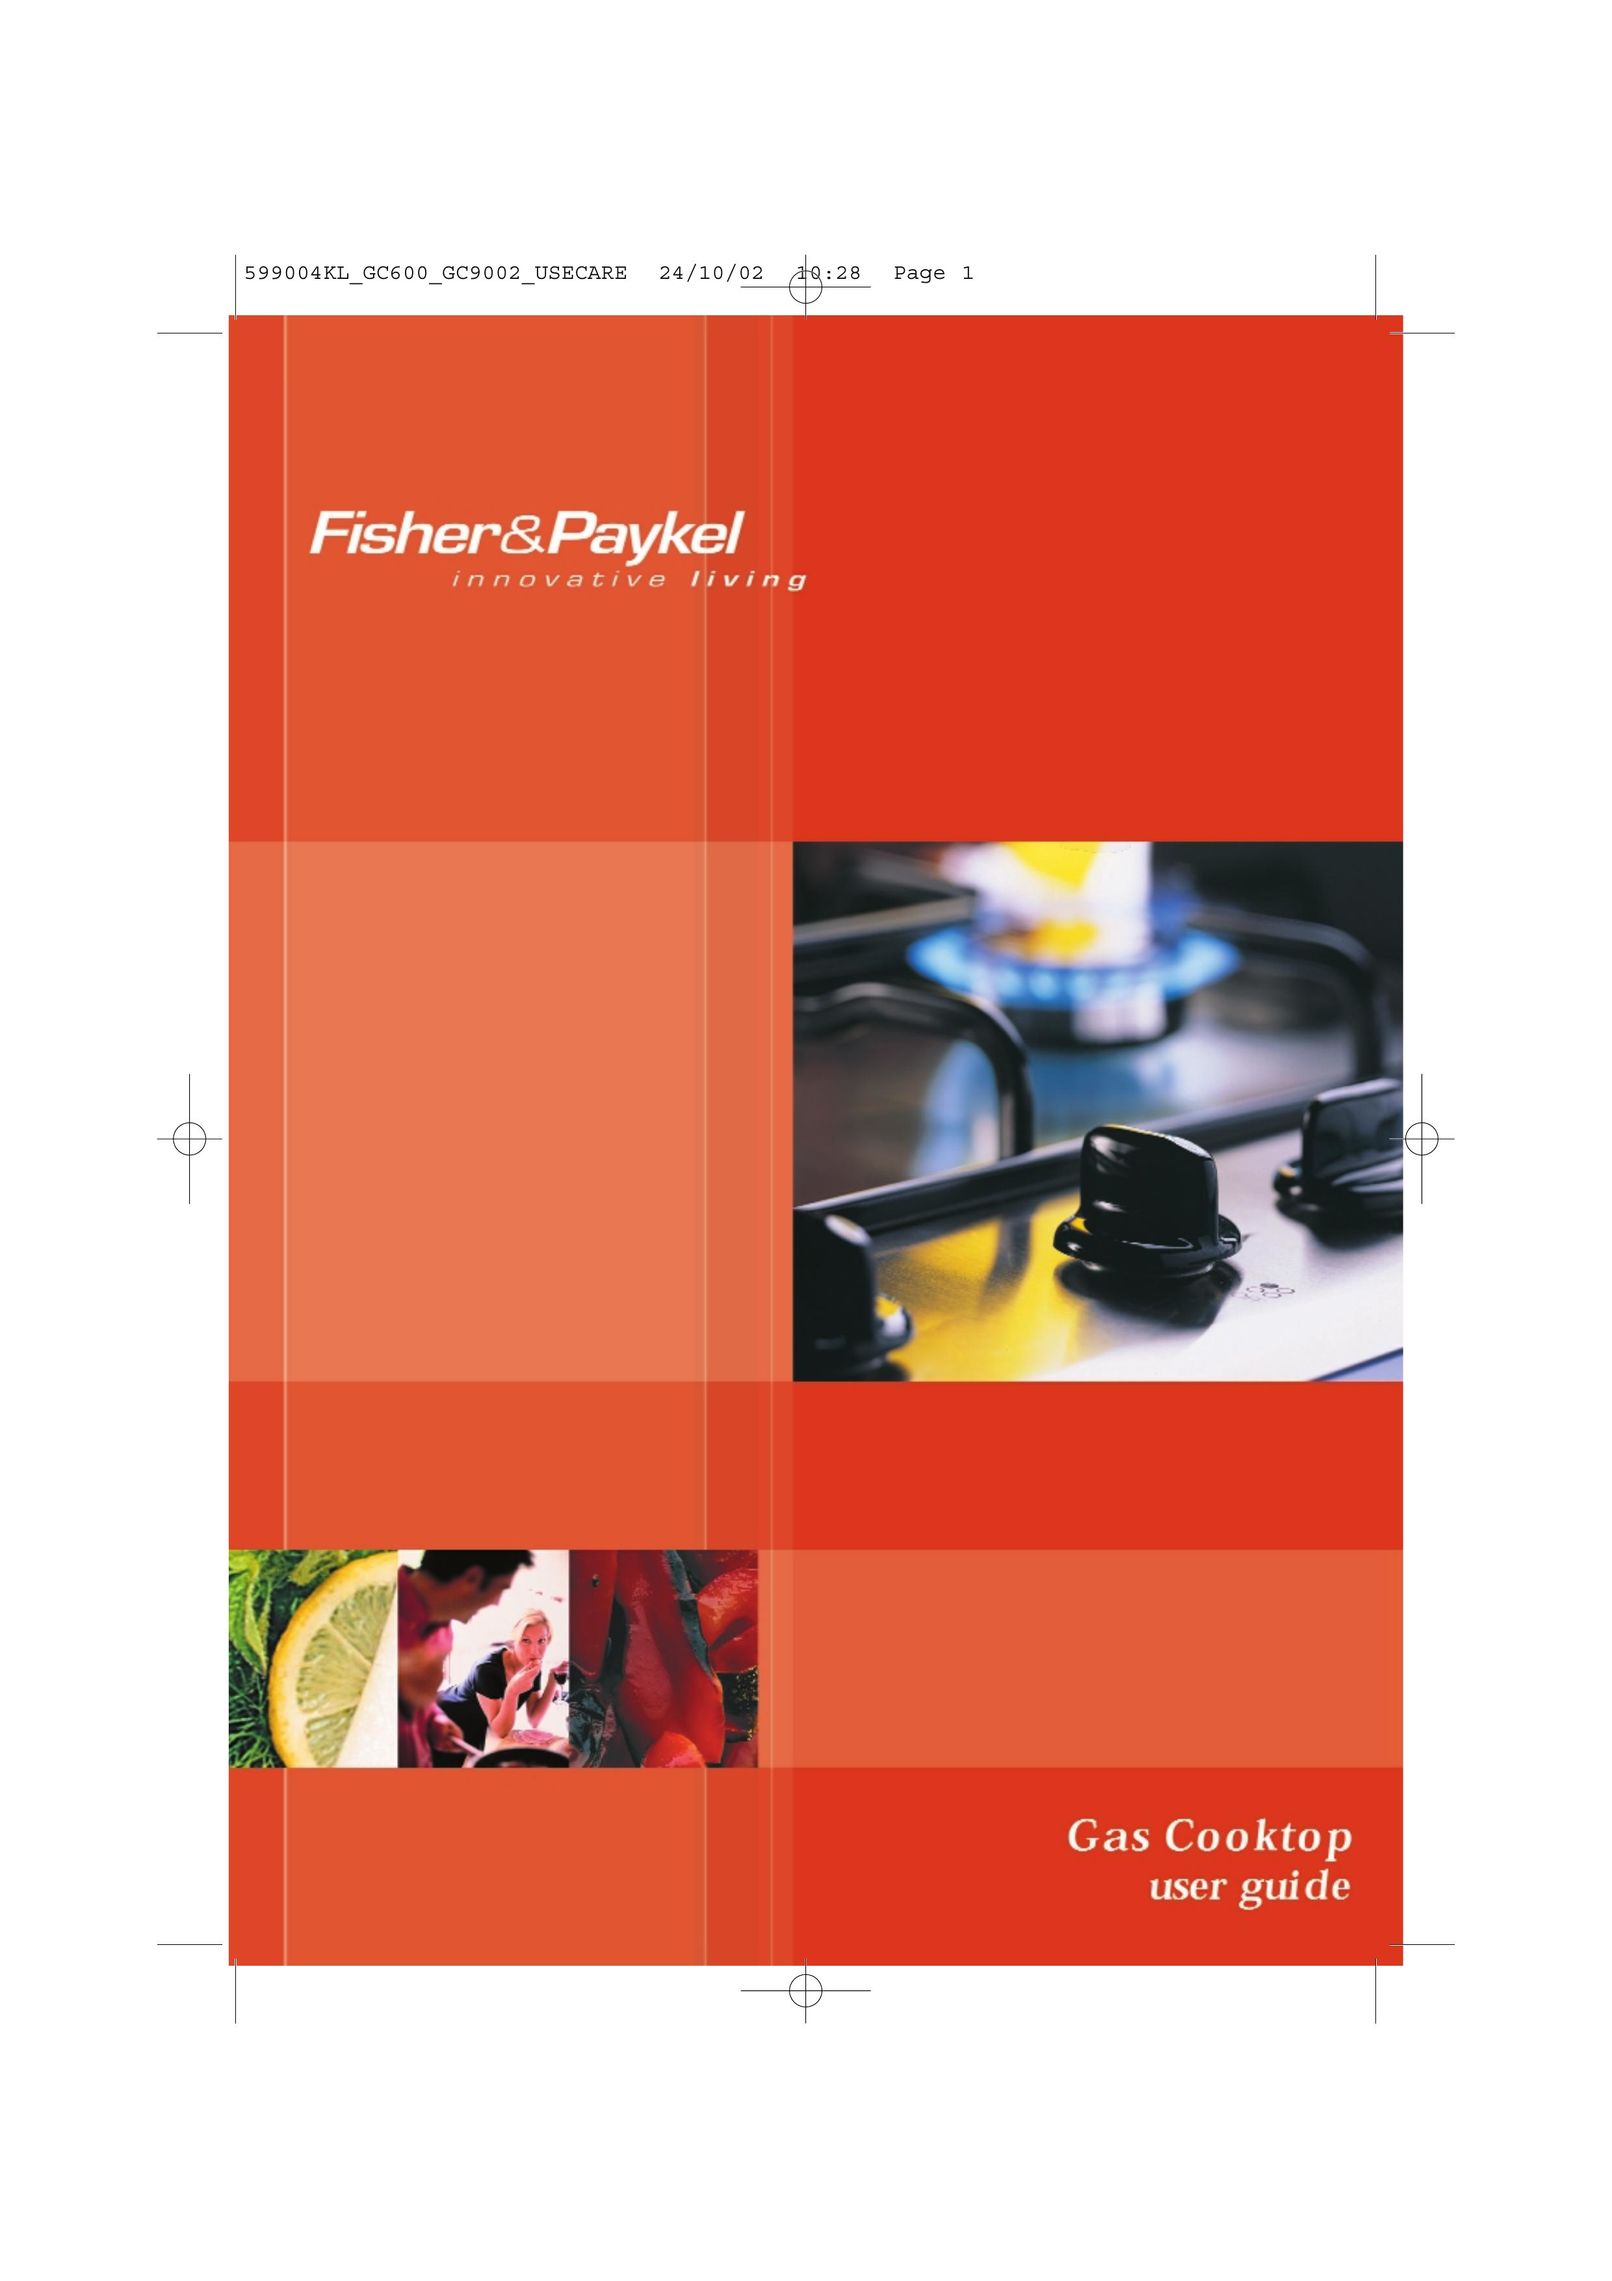 Fisher & Paykel CG602 Cooktop User Manual (Page 1)